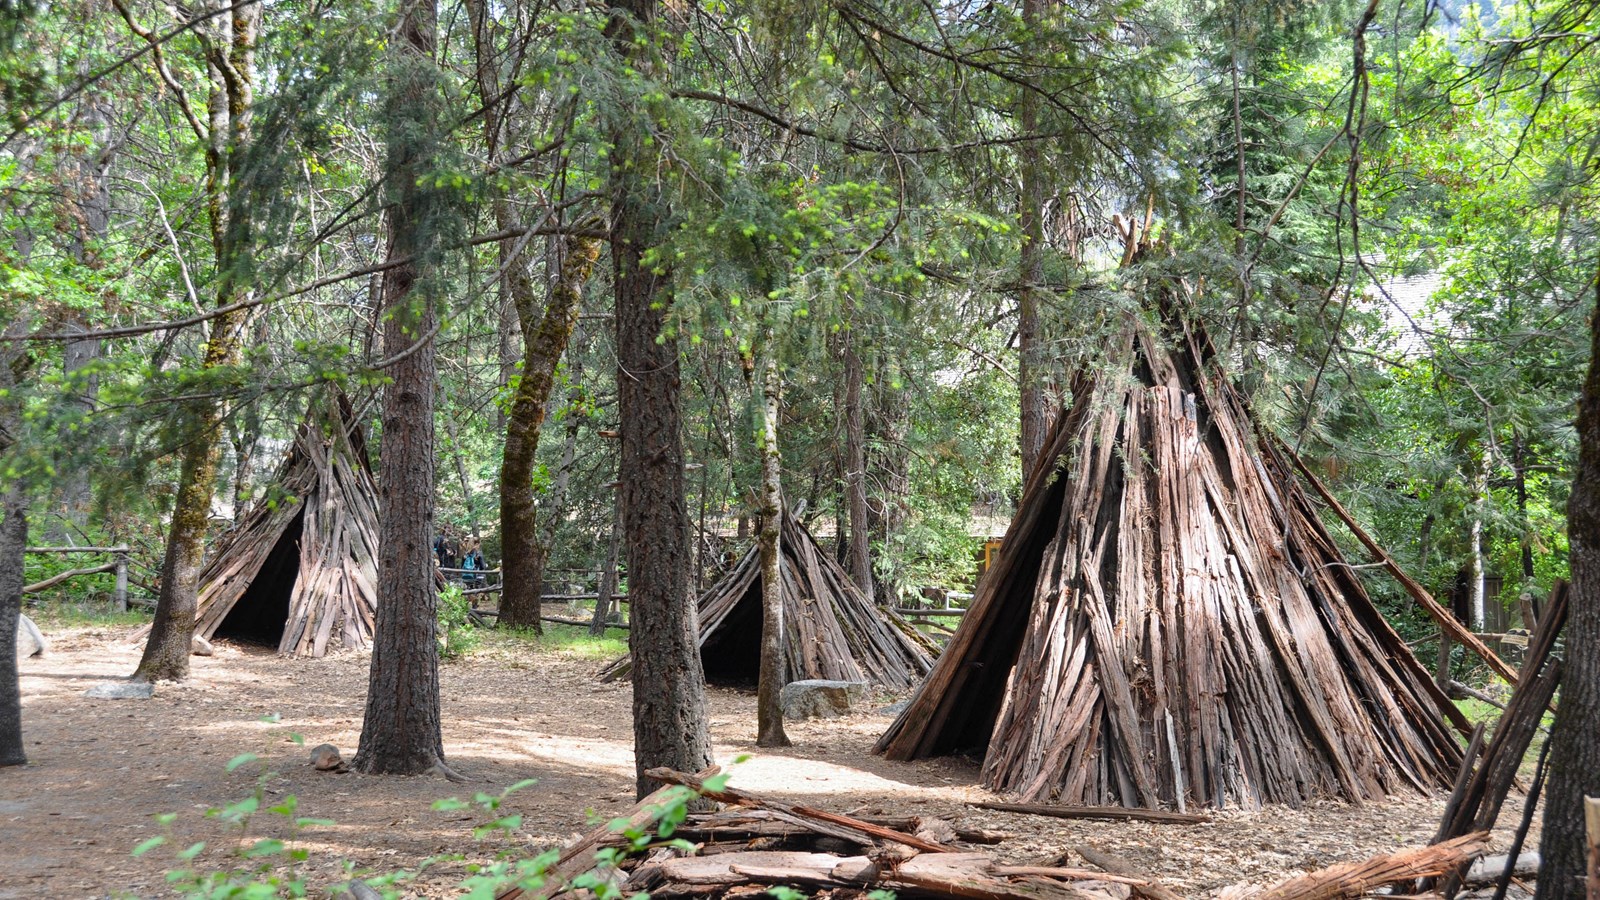 Reconstructed bark houses within the Indian Village